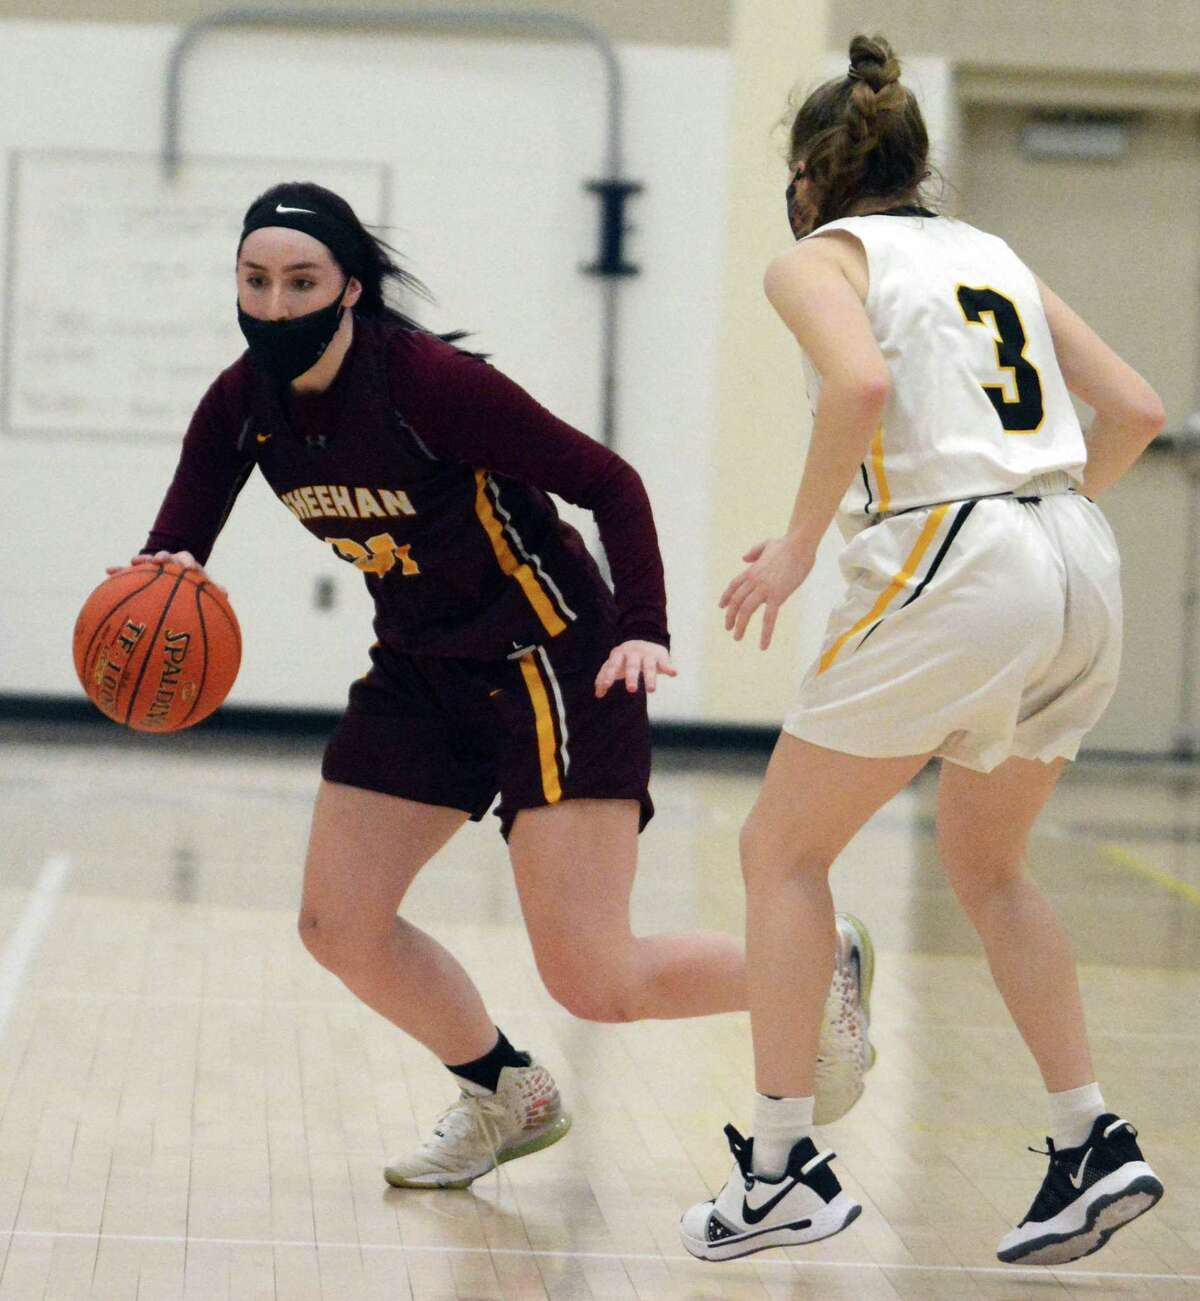 Sheehan’s Hayleigh Lagasse, left, dribbles while defended by Hand’s Hadley Houghton earlier this season.